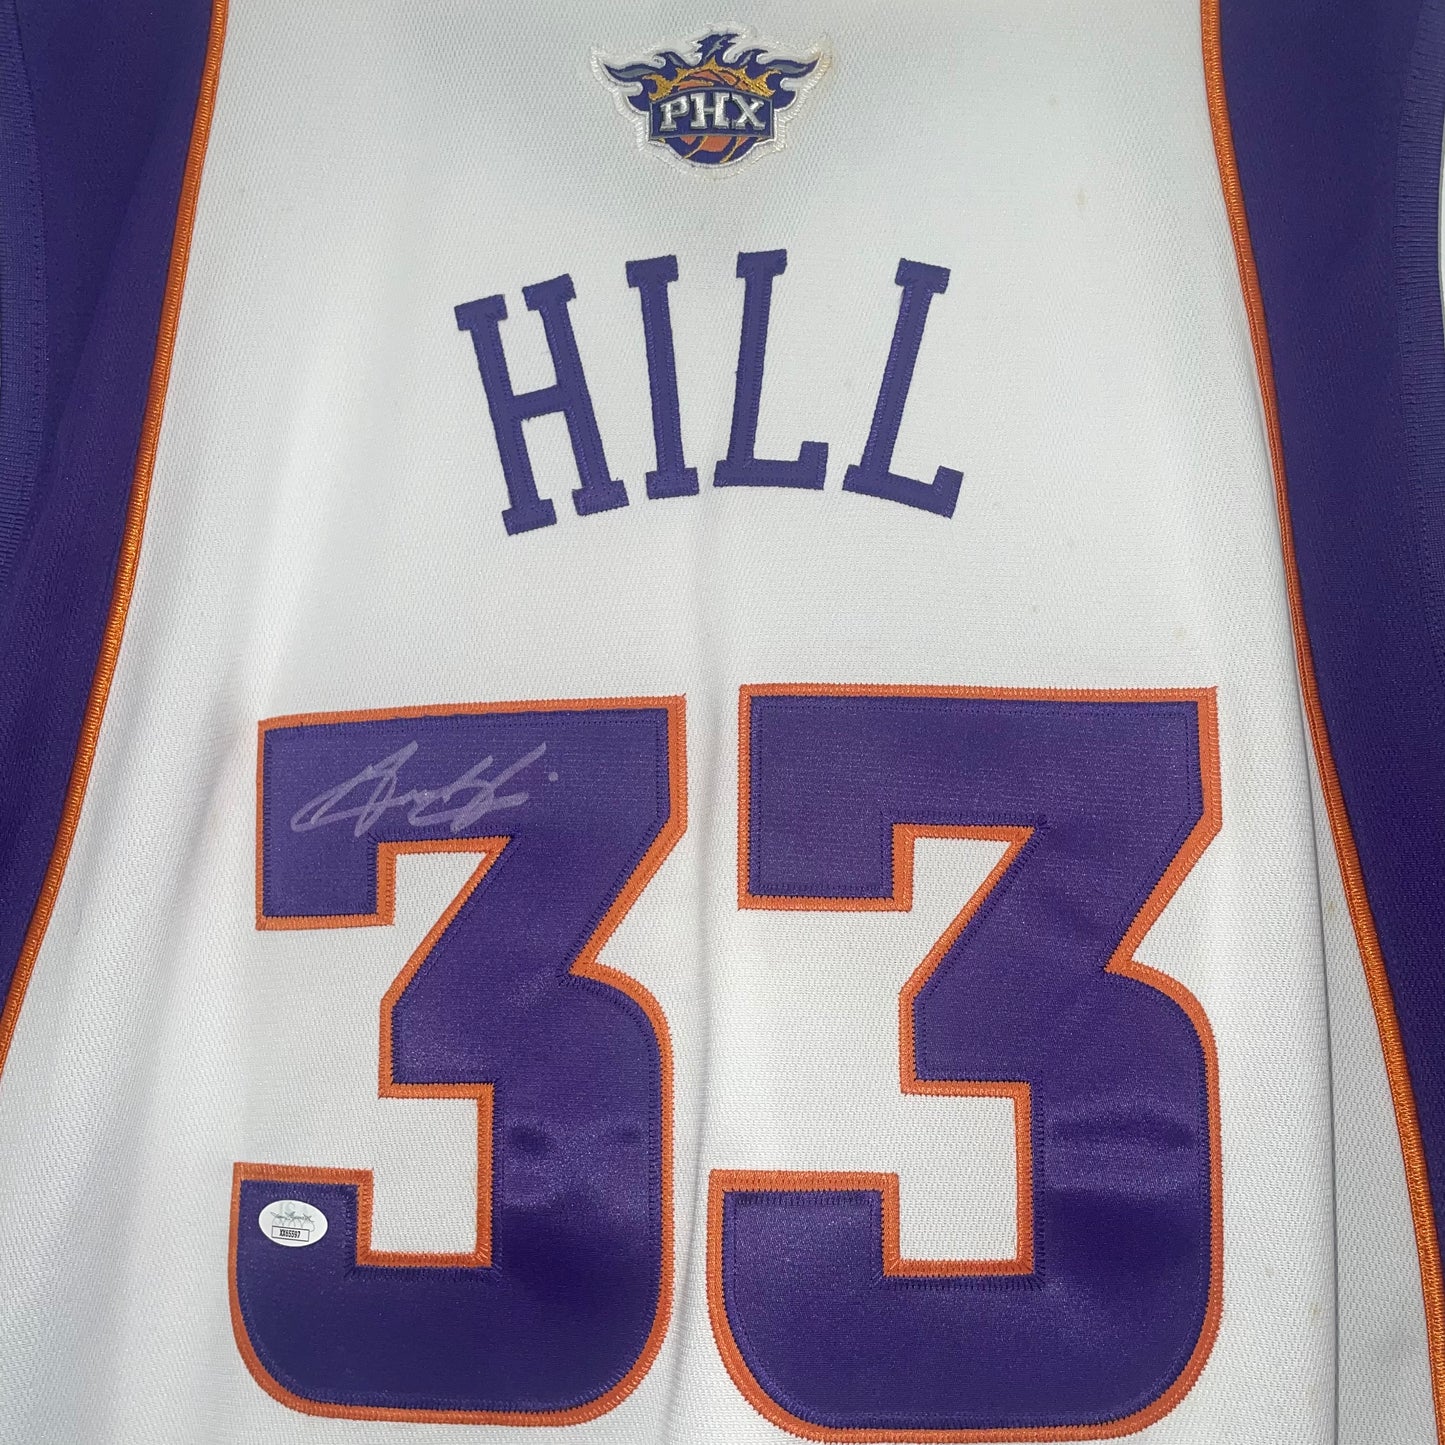 Grant Hill Signed NBA Authentic Jersey JSA AUTH